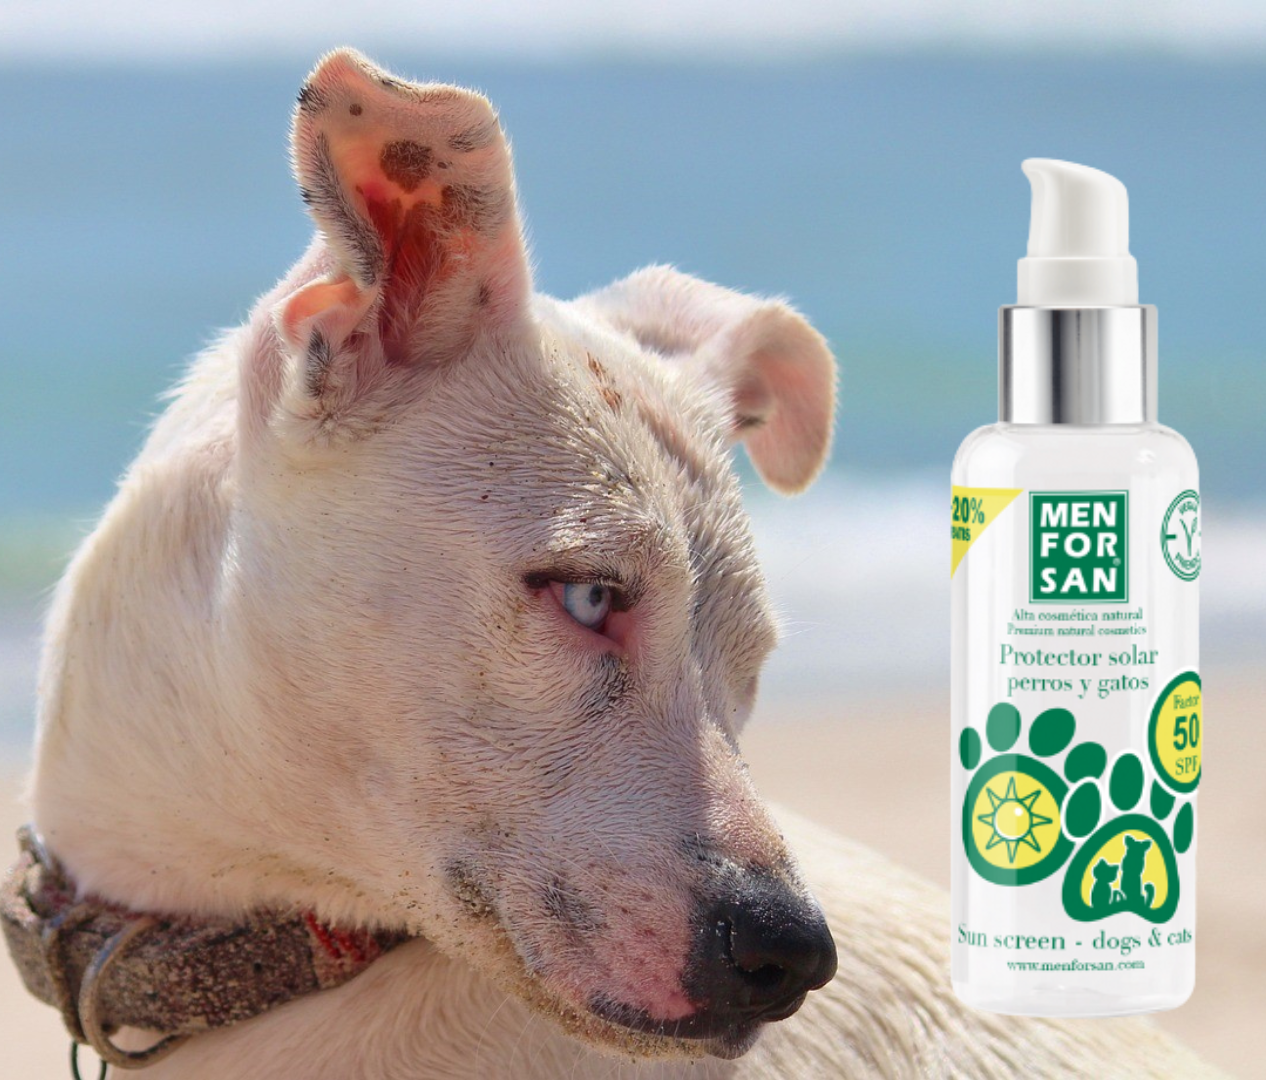 Sunscreen for dogs F50